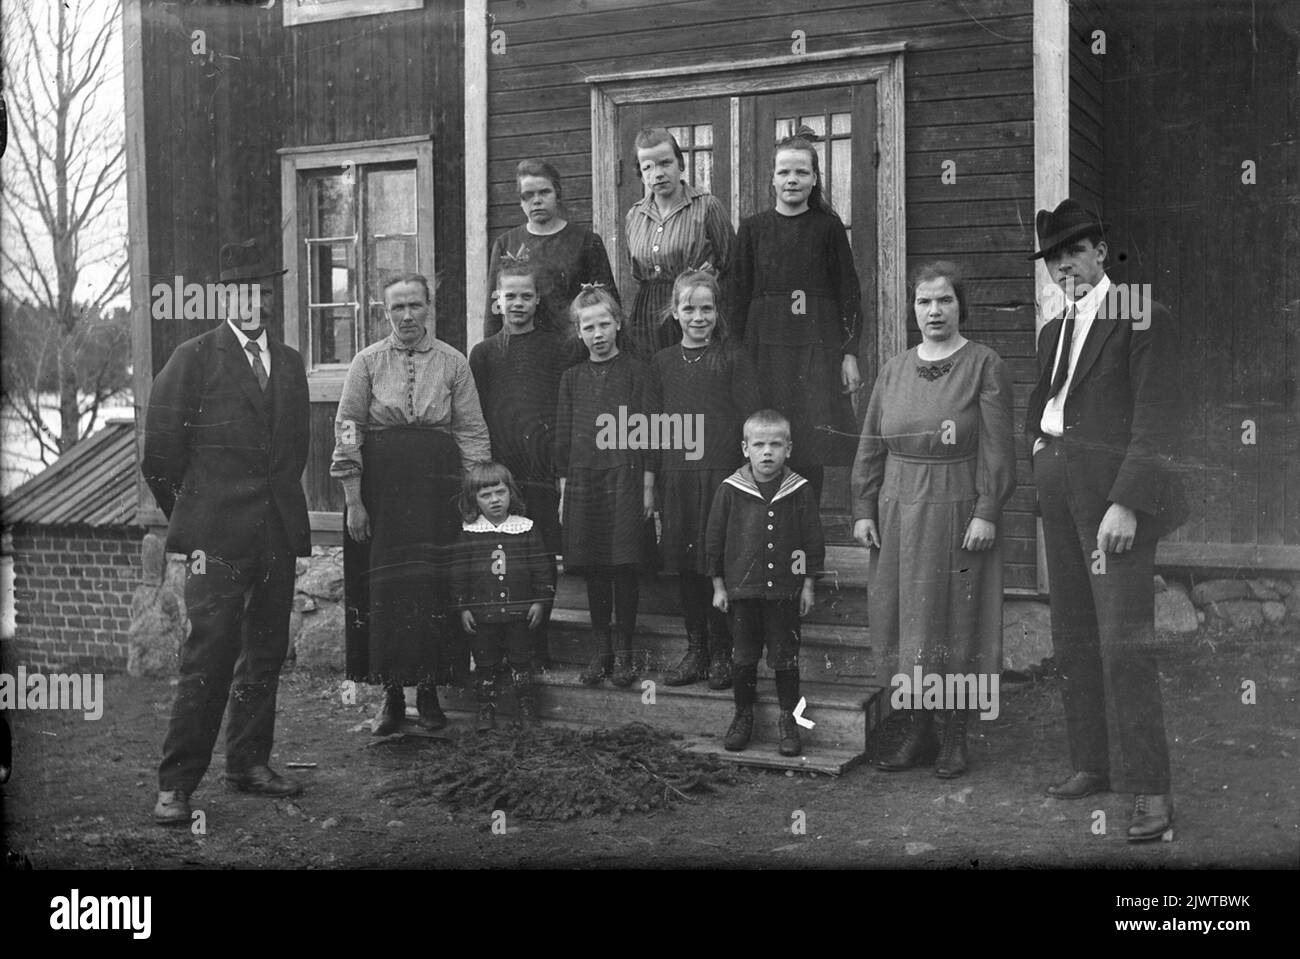 Mason A. W. Alm with family. From left Anders Wilhelm Alm b. November 28, 1875 on May 24, 1952, Karin Östlund-Olm b. 4 December 1876 d. July 14, 1935. At the top from left Linnea b. September 22, 1906, Karin b. October 18, 1908, Nancy F . 12 March 1909. Middle from left Stina b. April 10, 1910 (twin), Märta October 15, 1911, Brita April 10, 1910 (twin), Frida b. April 7, 1902, August July 2, 1900. Farthest from left Göran September 15 1918 and Sune March 23, 1916 Murare A. W. Alm med familj. Från vänster Anders Wilhelm Alm f. 28 november 1875 d. 24 maj 1952, Karin Östlund-Alm f. 4 december 187 Stock Photo